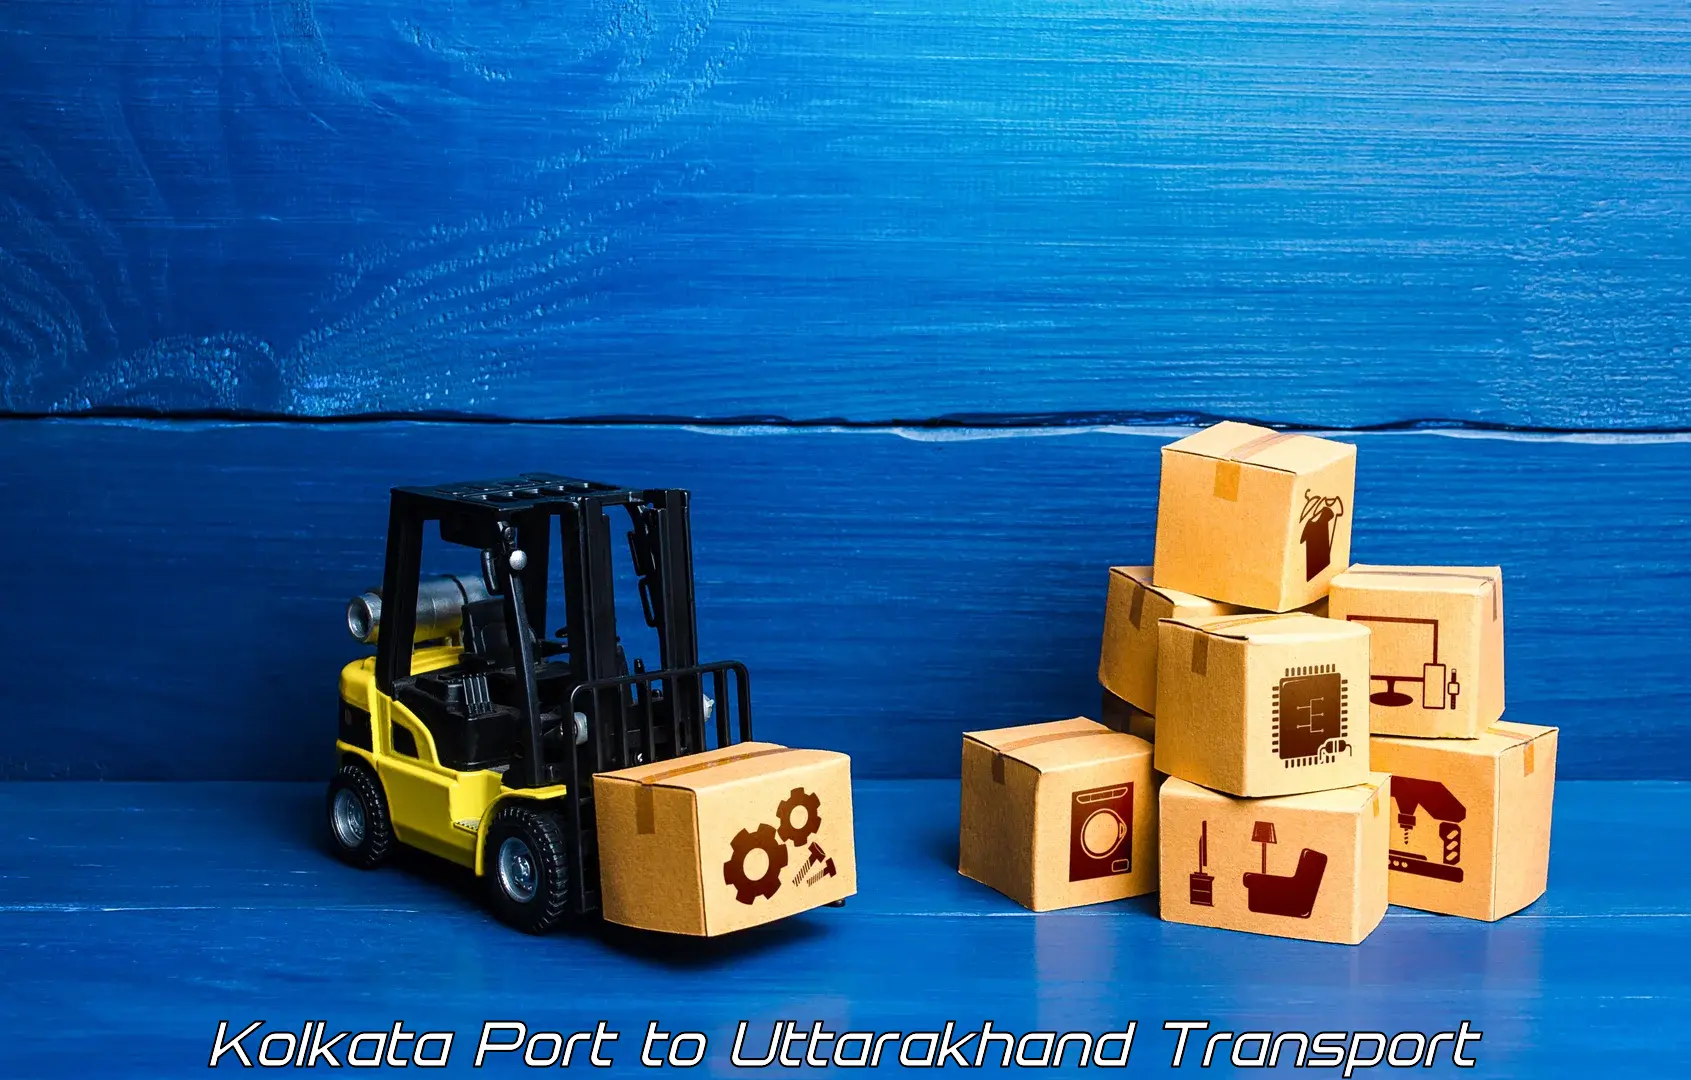 Part load transport service in India Kolkata Port to Roorkee